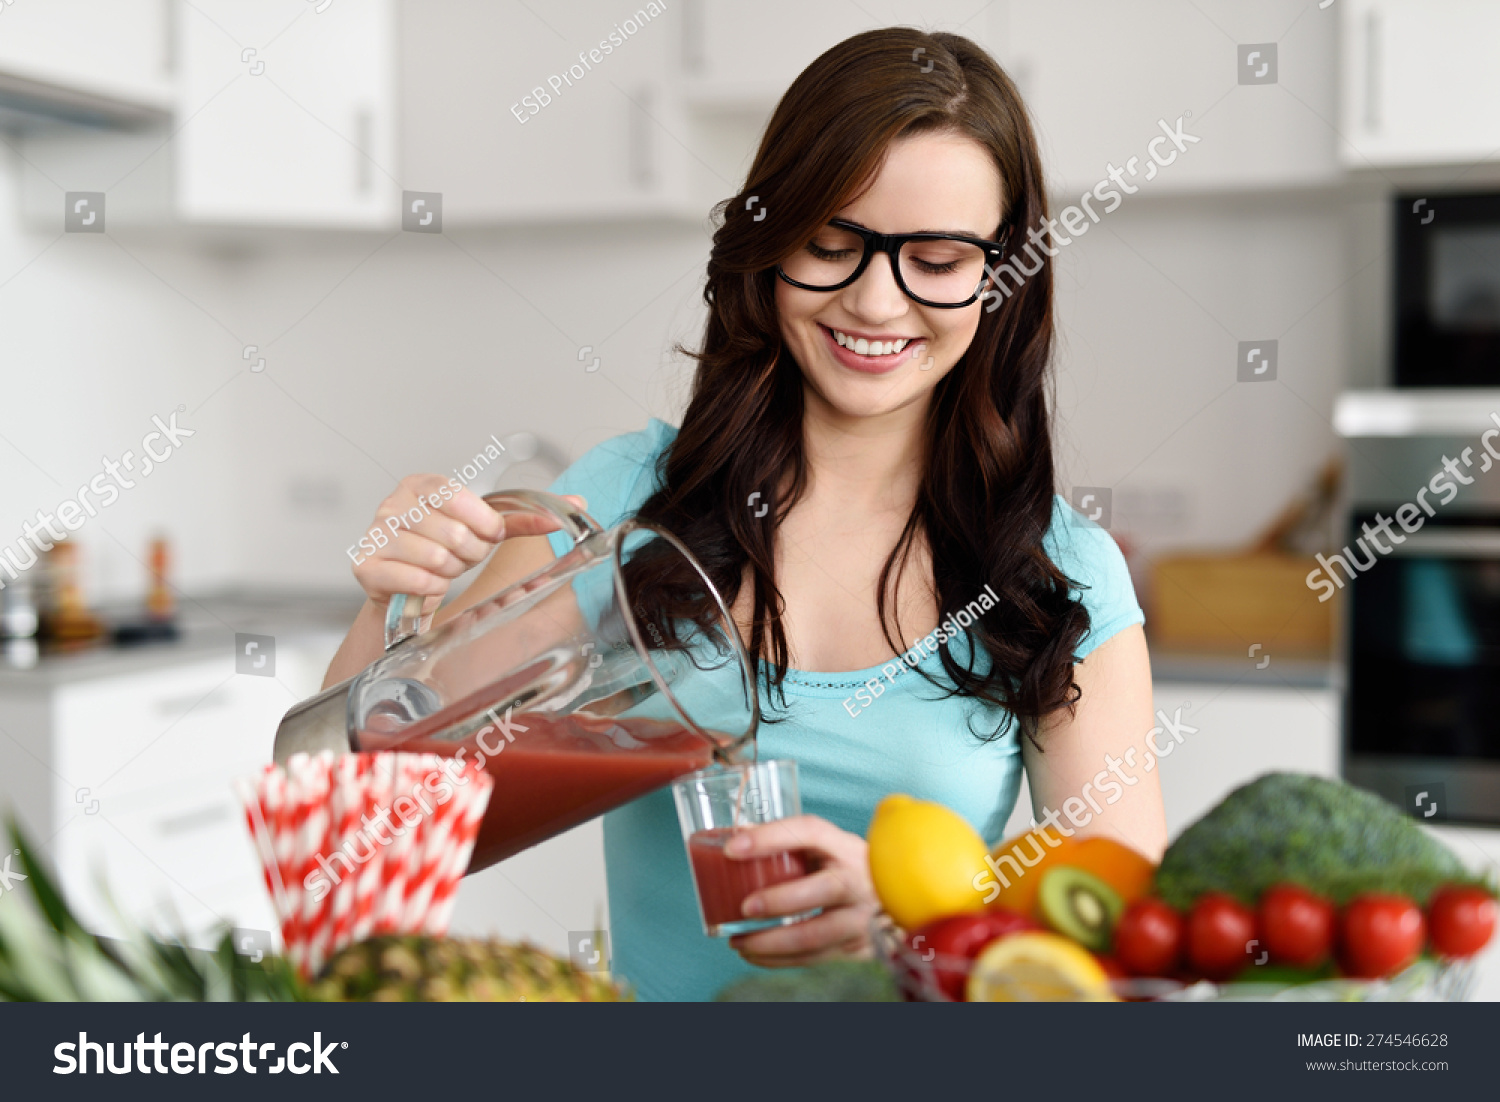 Happy healthy young woman wearing glasses pouring vegetable smoothies freshly made from assorted vegetable ingredients on her kitchen counter #274546628